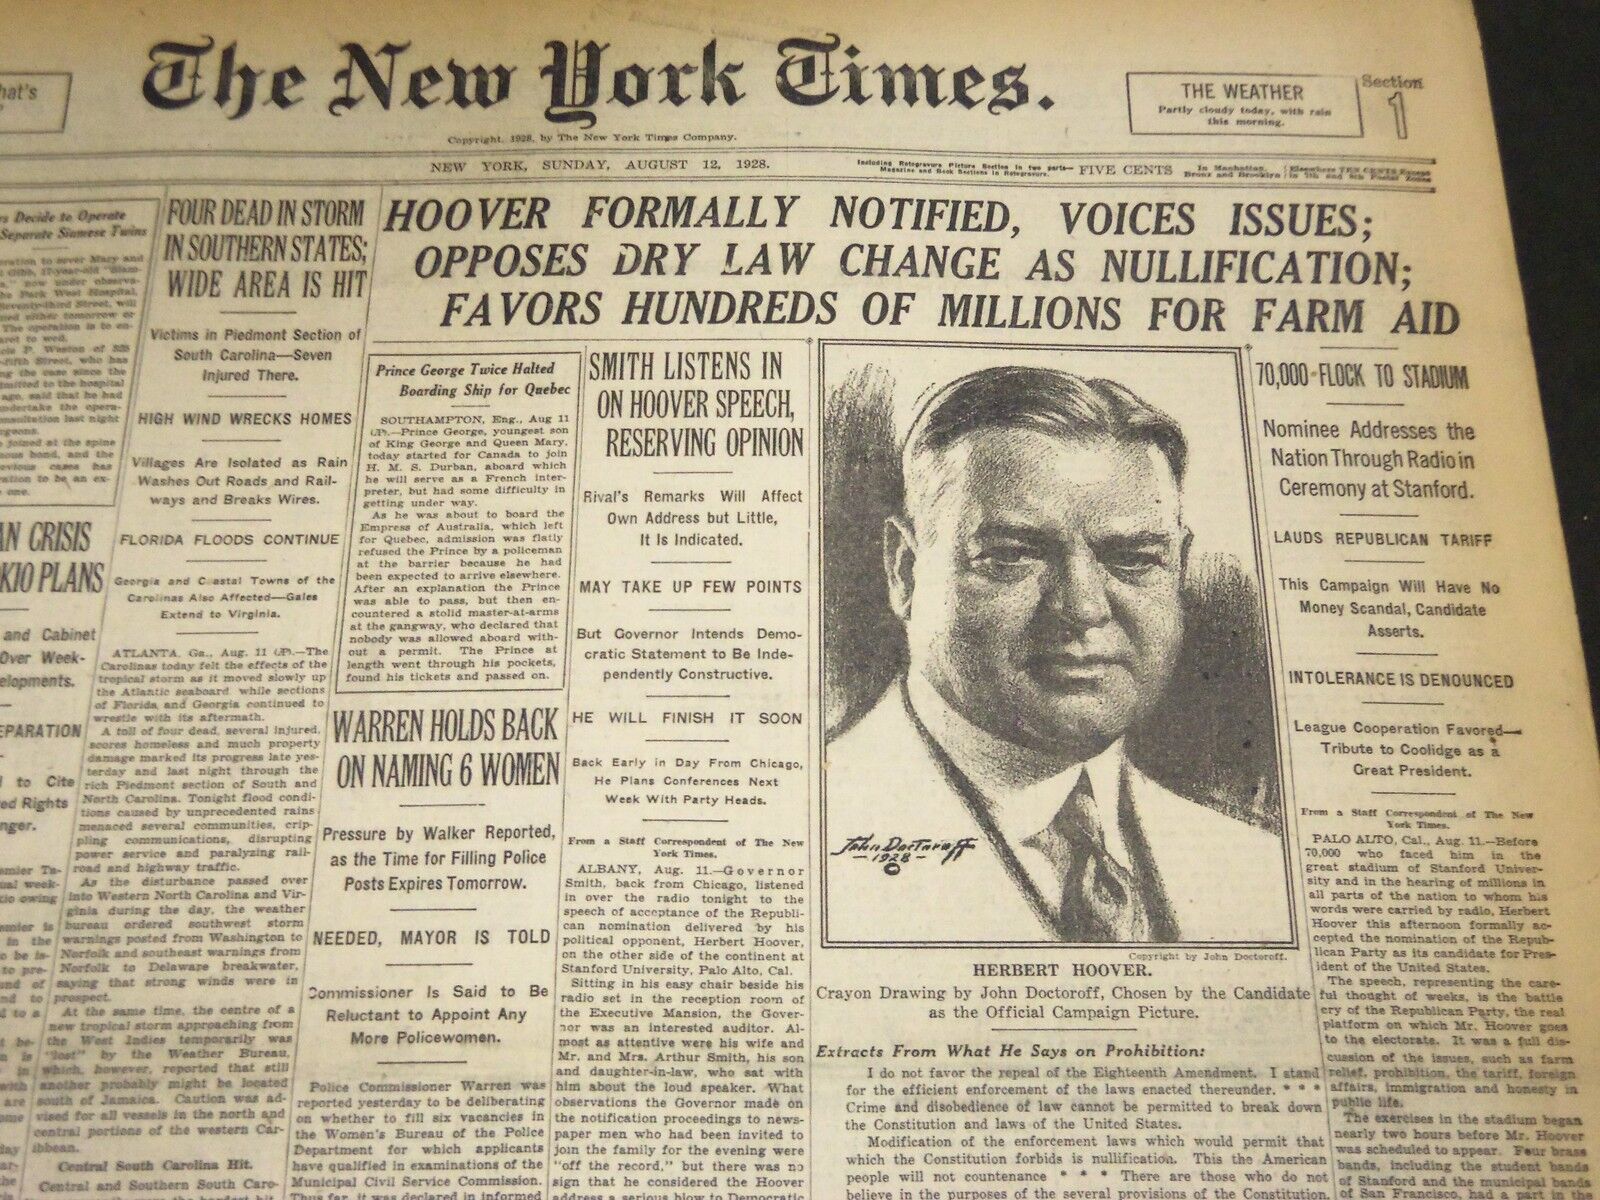 1928 AUGUST 12 NEW YORK TIMES - HOOVER FORMALLY NOTIFIED, VOICES ISSUES- NT 5087